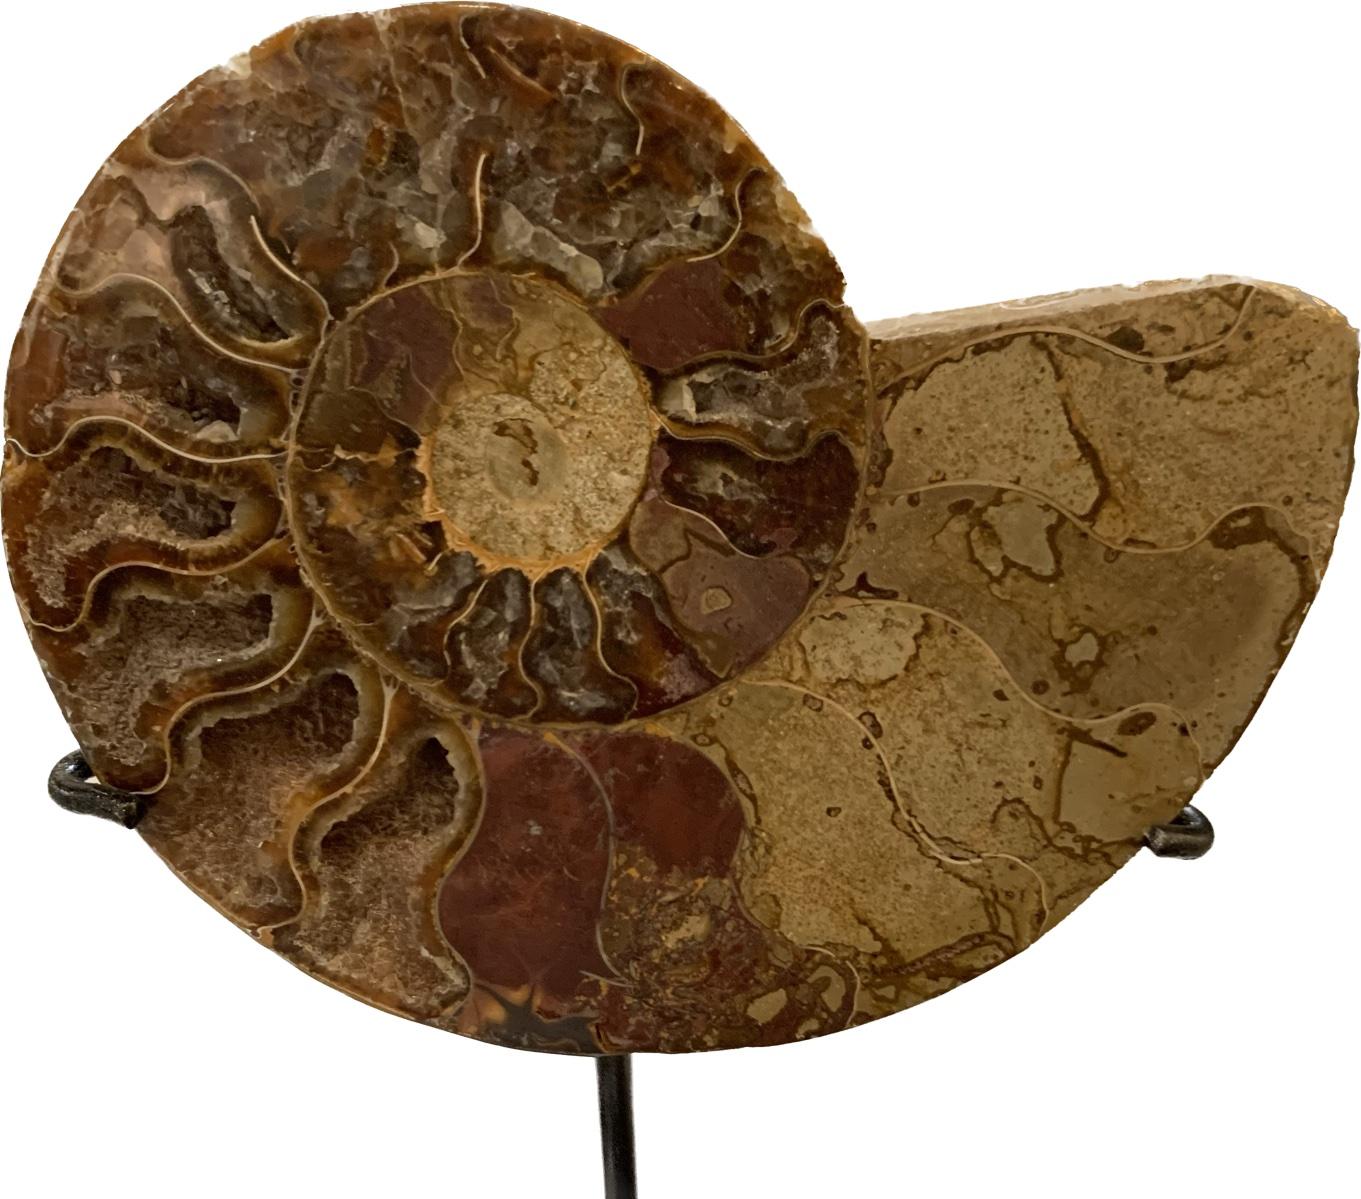 Prehistoric Madagascar polished ammonite newly mounted on custom steel stand.
Shades of brown.
One of many from a large collection.
Bases measure 4.5